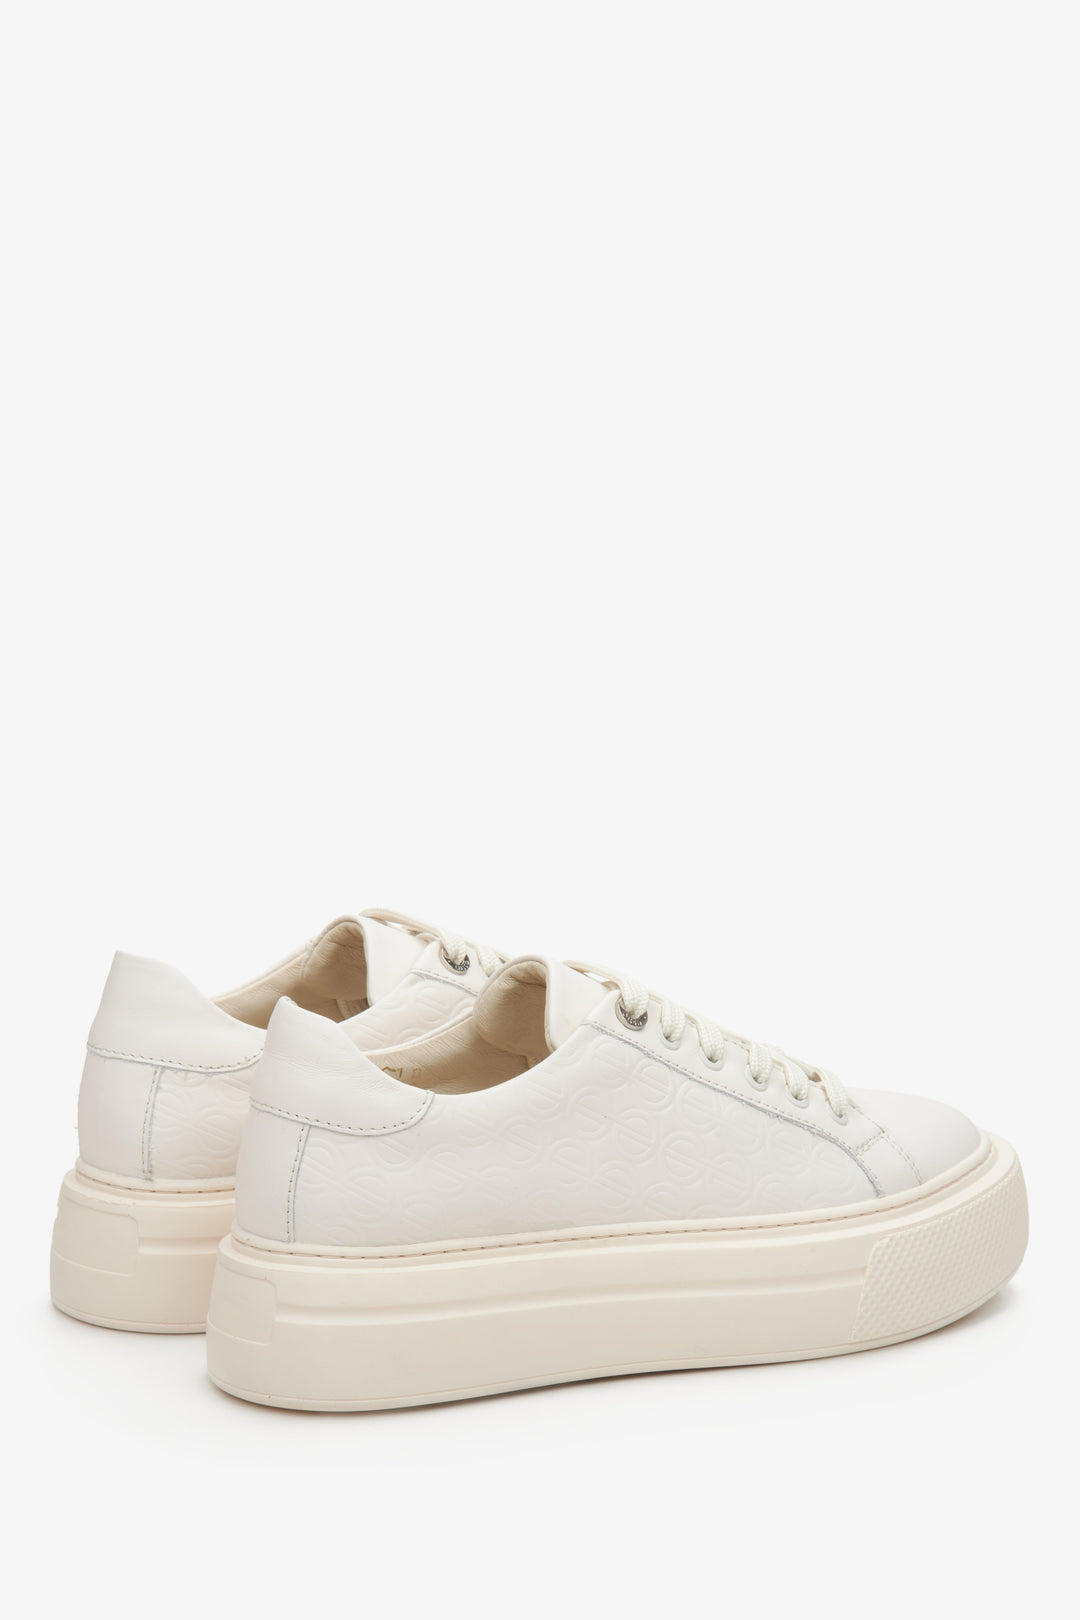 Estro women's leather sneakers in light beige - close-up on the side line and heel.